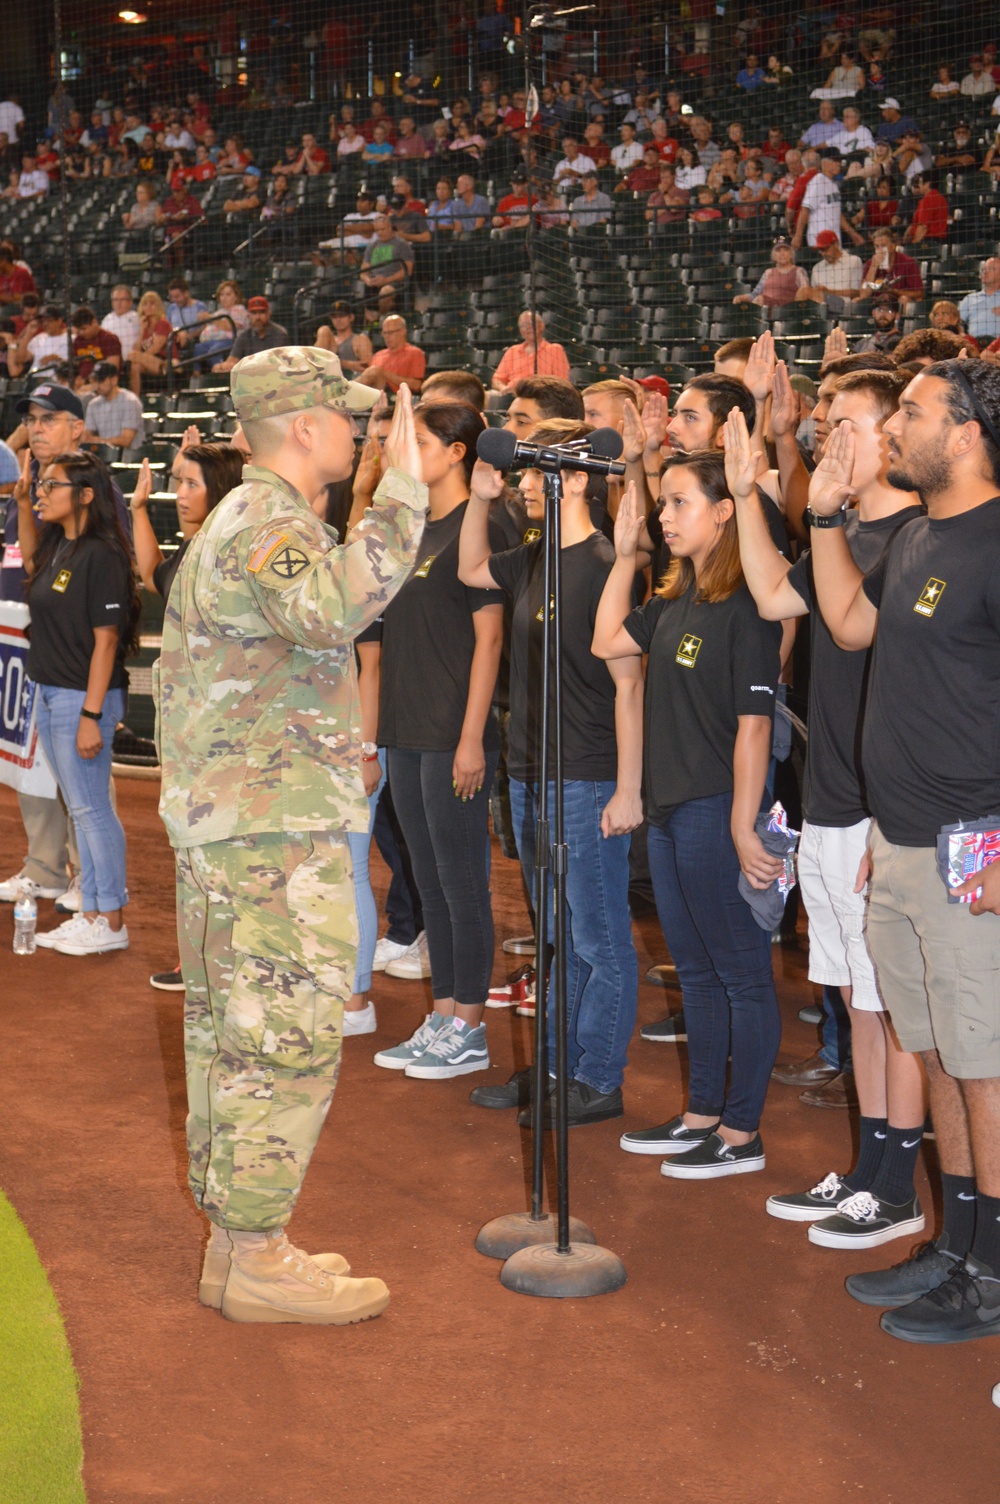 Phoenix Recruiting Battalion holds mass enlistment at MLB game